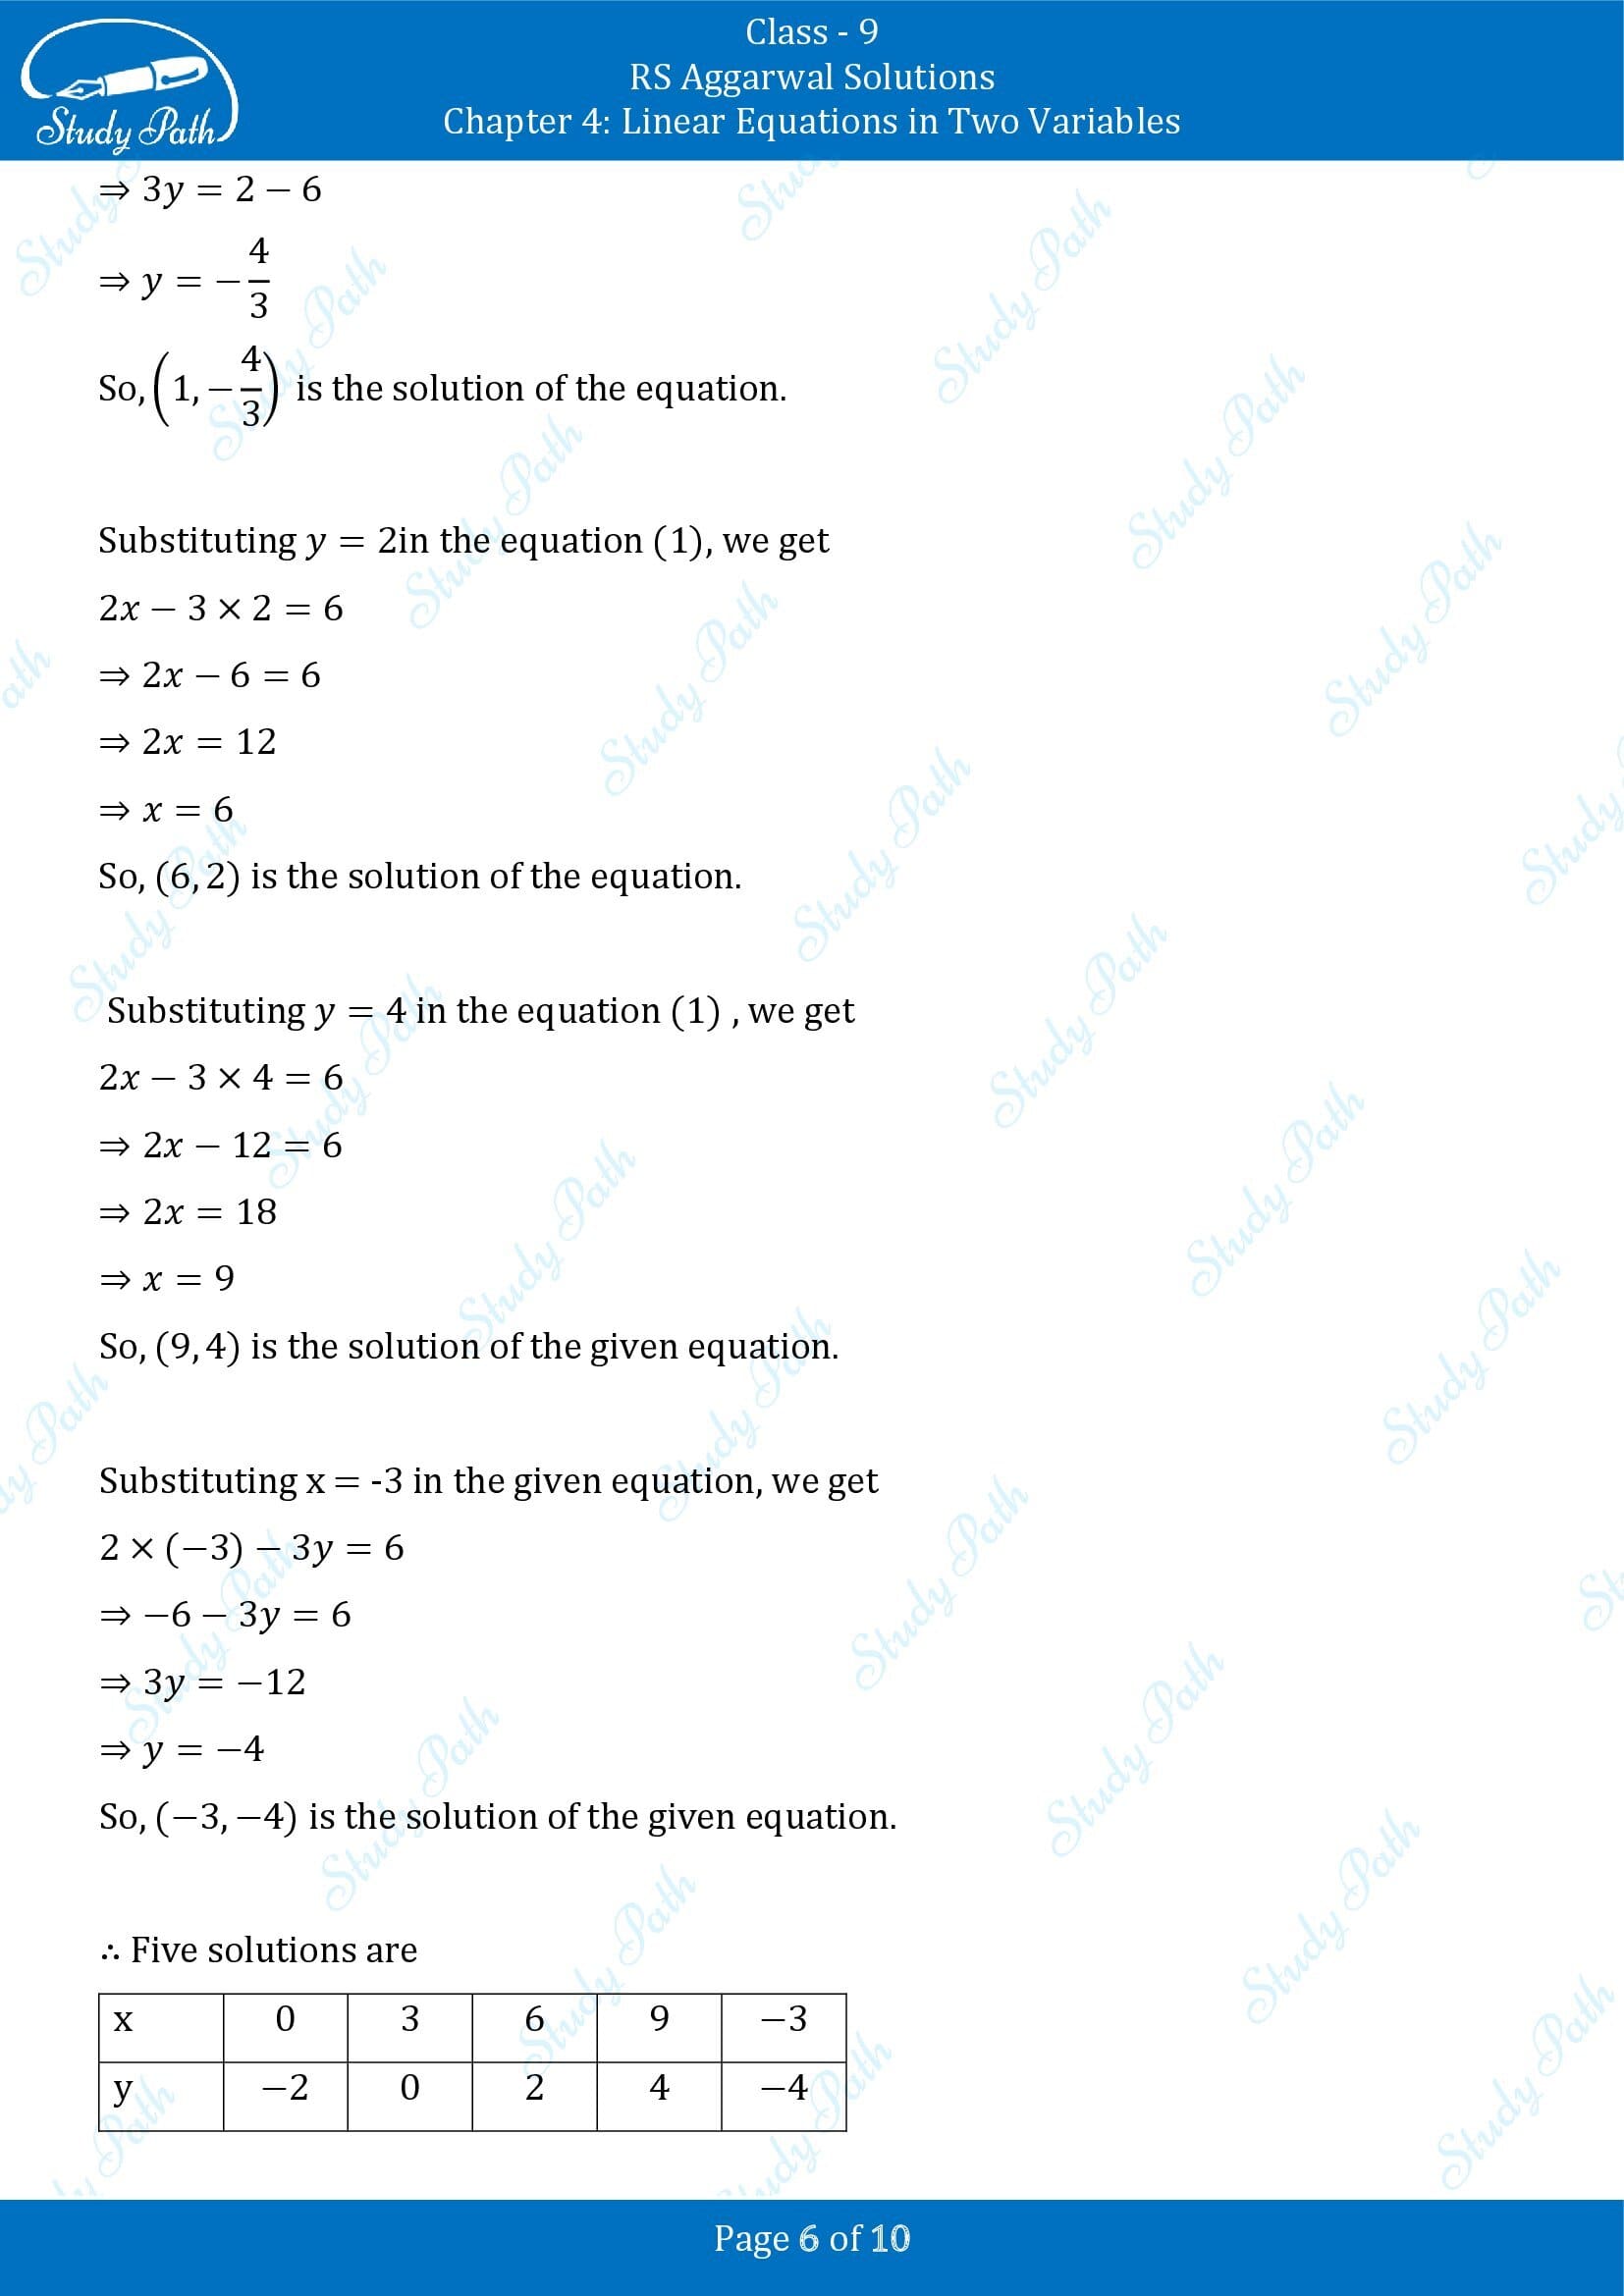 RS Aggarwal Solutions Class 9 Chapter 4 Linear Equations in Two Variables Exercise 4A 0006